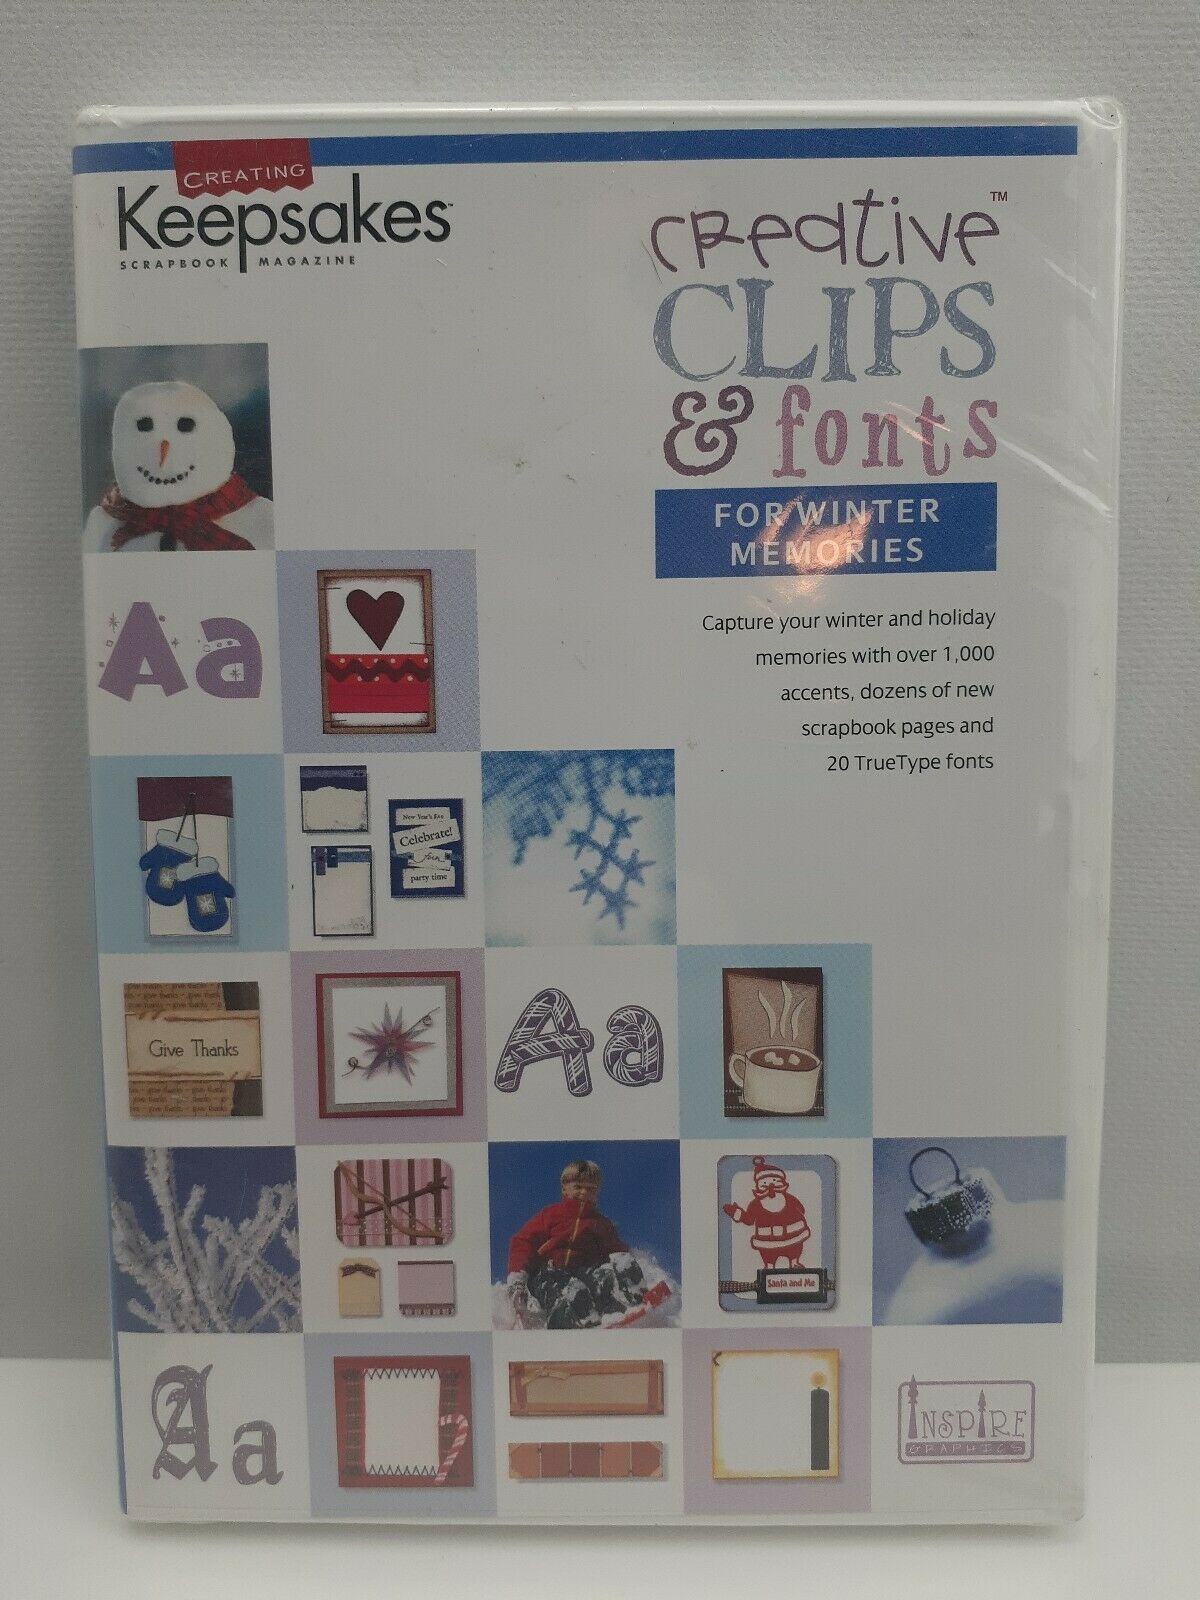 Keepsakes Creative Clips & Fonts For Winter Memories